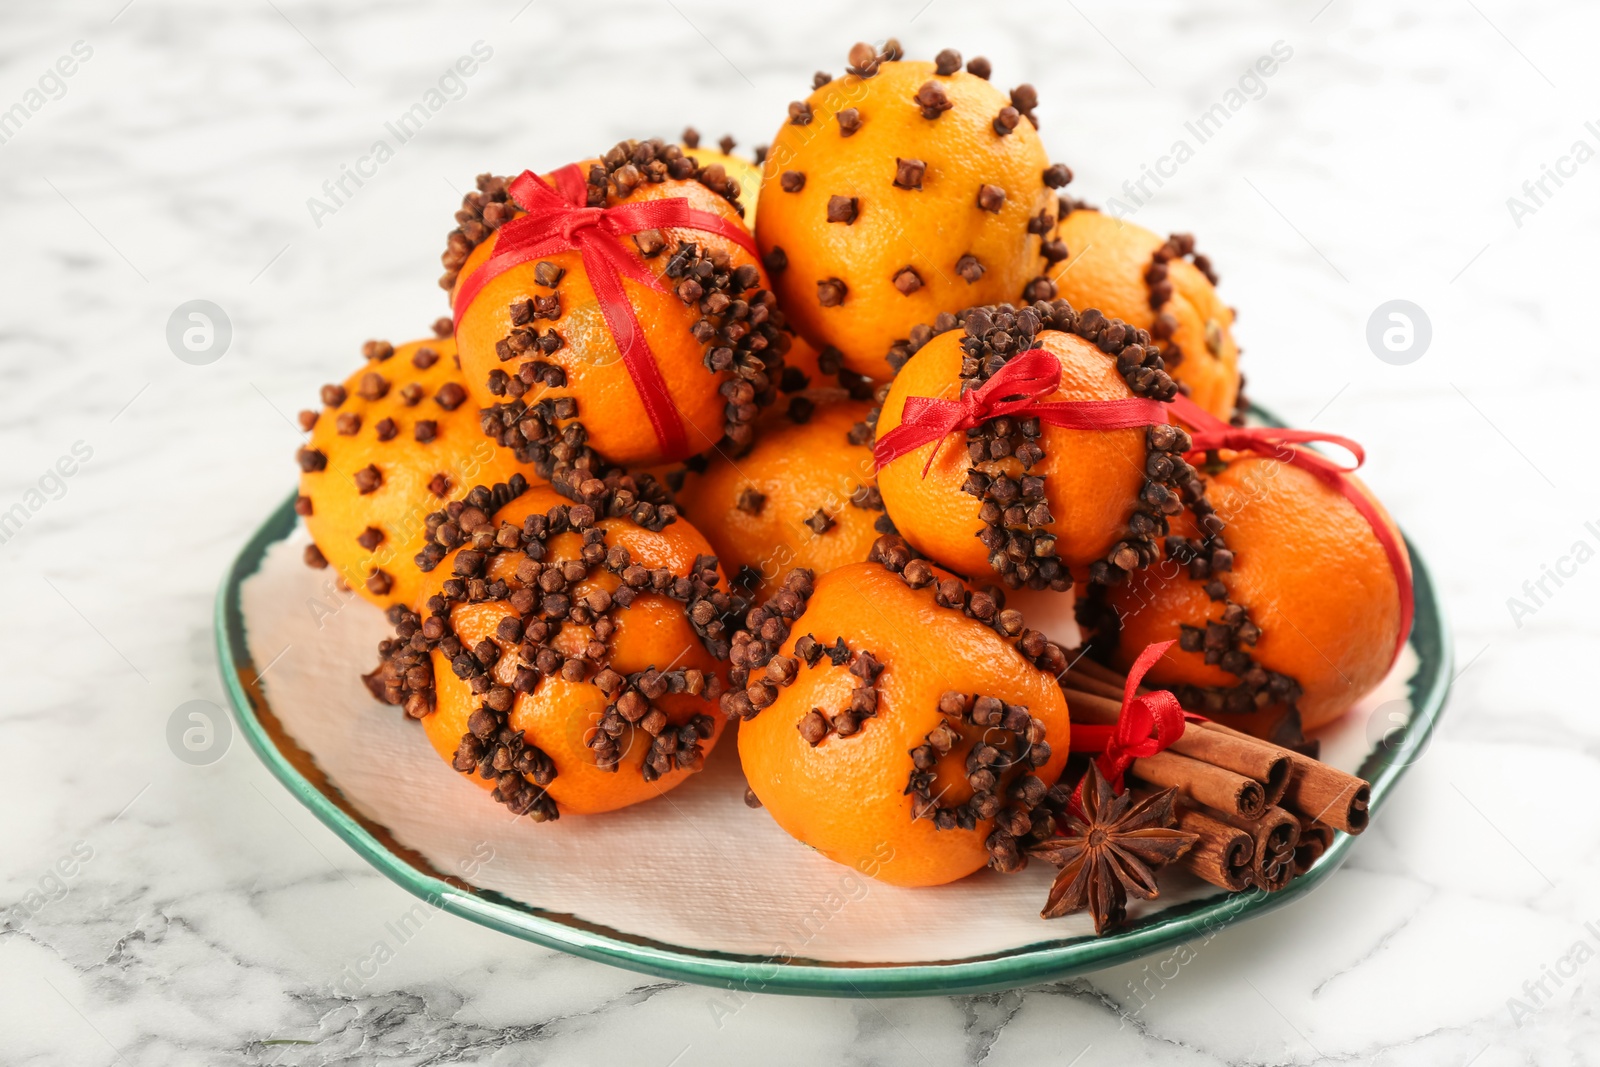 Photo of Pomander balls made of fresh tangerines and cloves white marble table